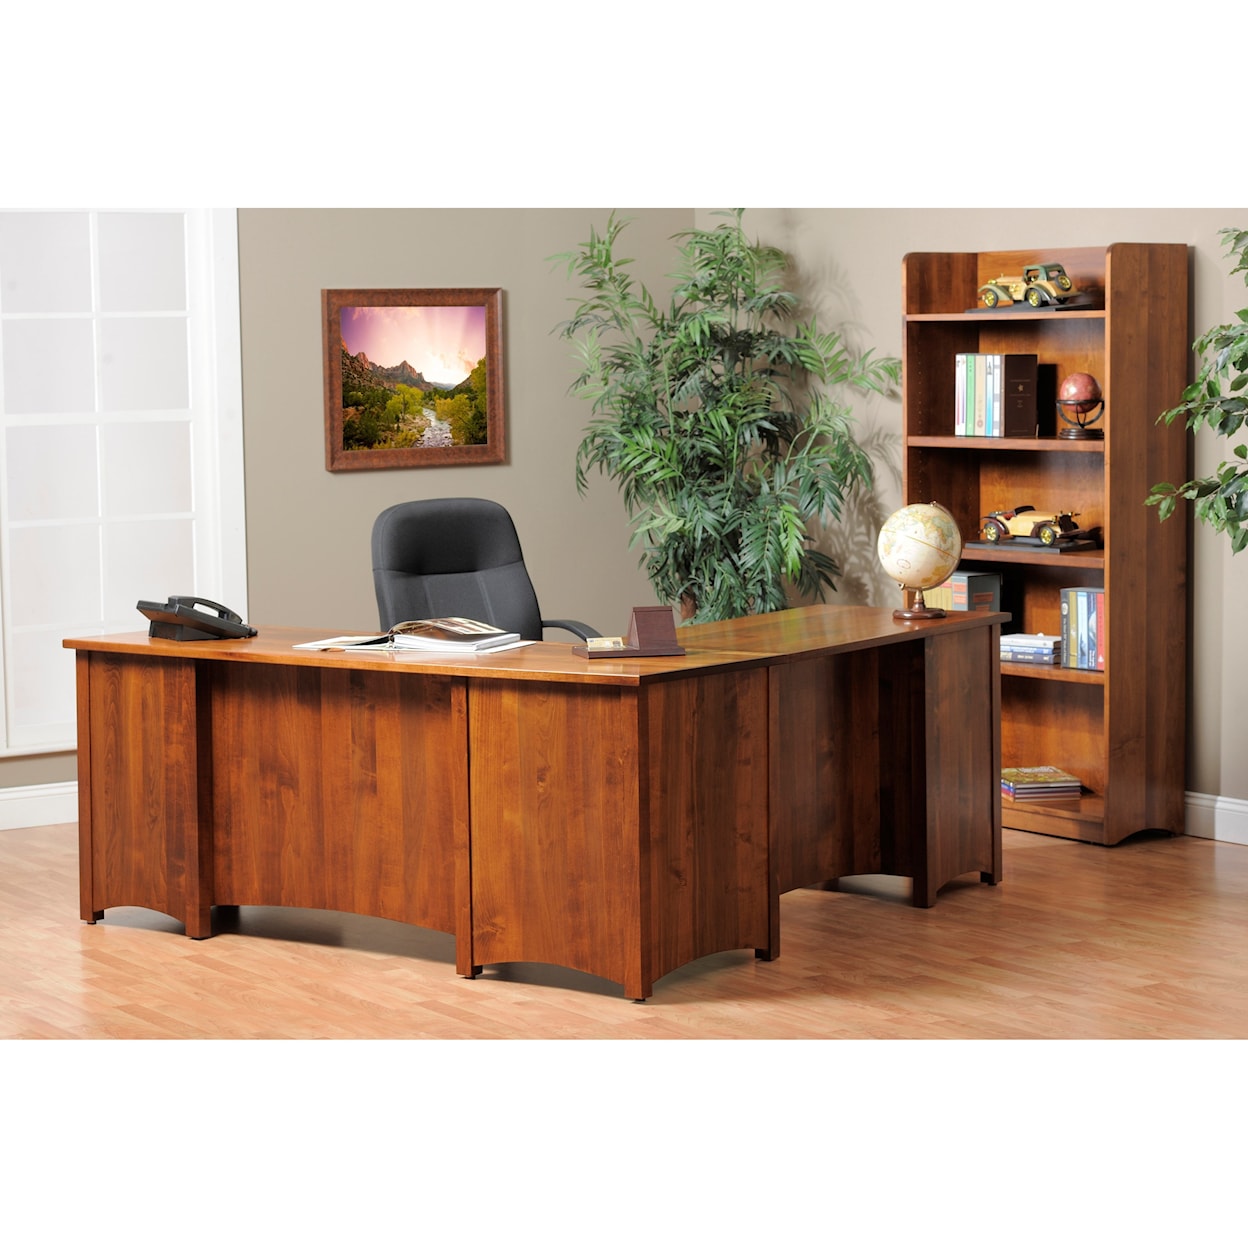 Y & T Woodcraft Rivertown Home Office Office Group